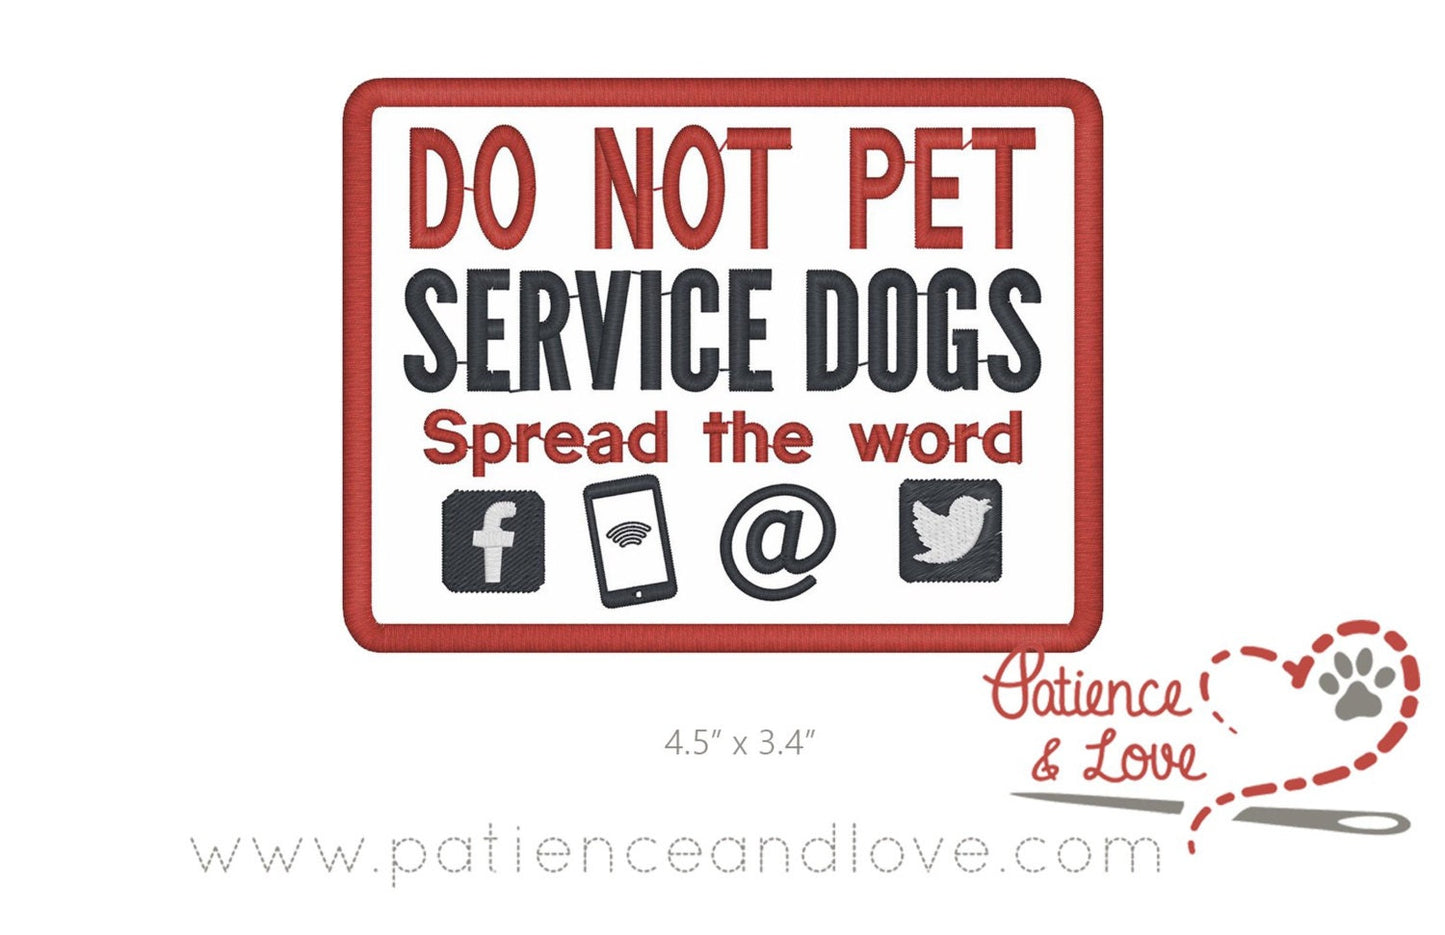 Do not pet service dogs, spread the word, with 4 sharing symbols, 4.5 x 3.5 embroidered patch